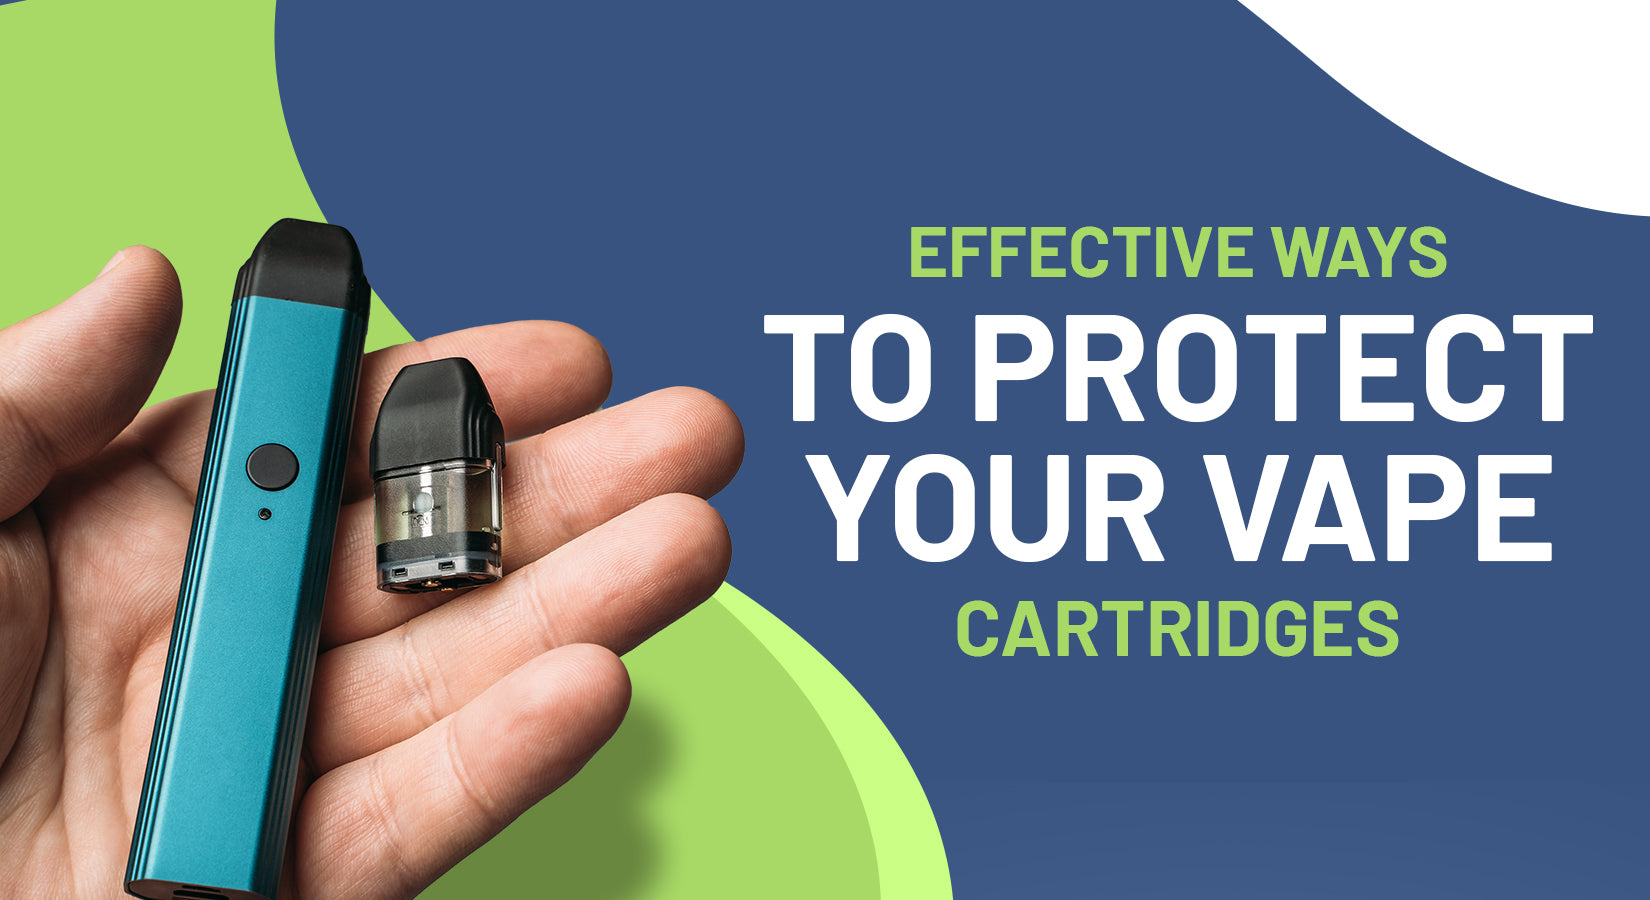 Effective Ways to Protect Your Vape Cartridges